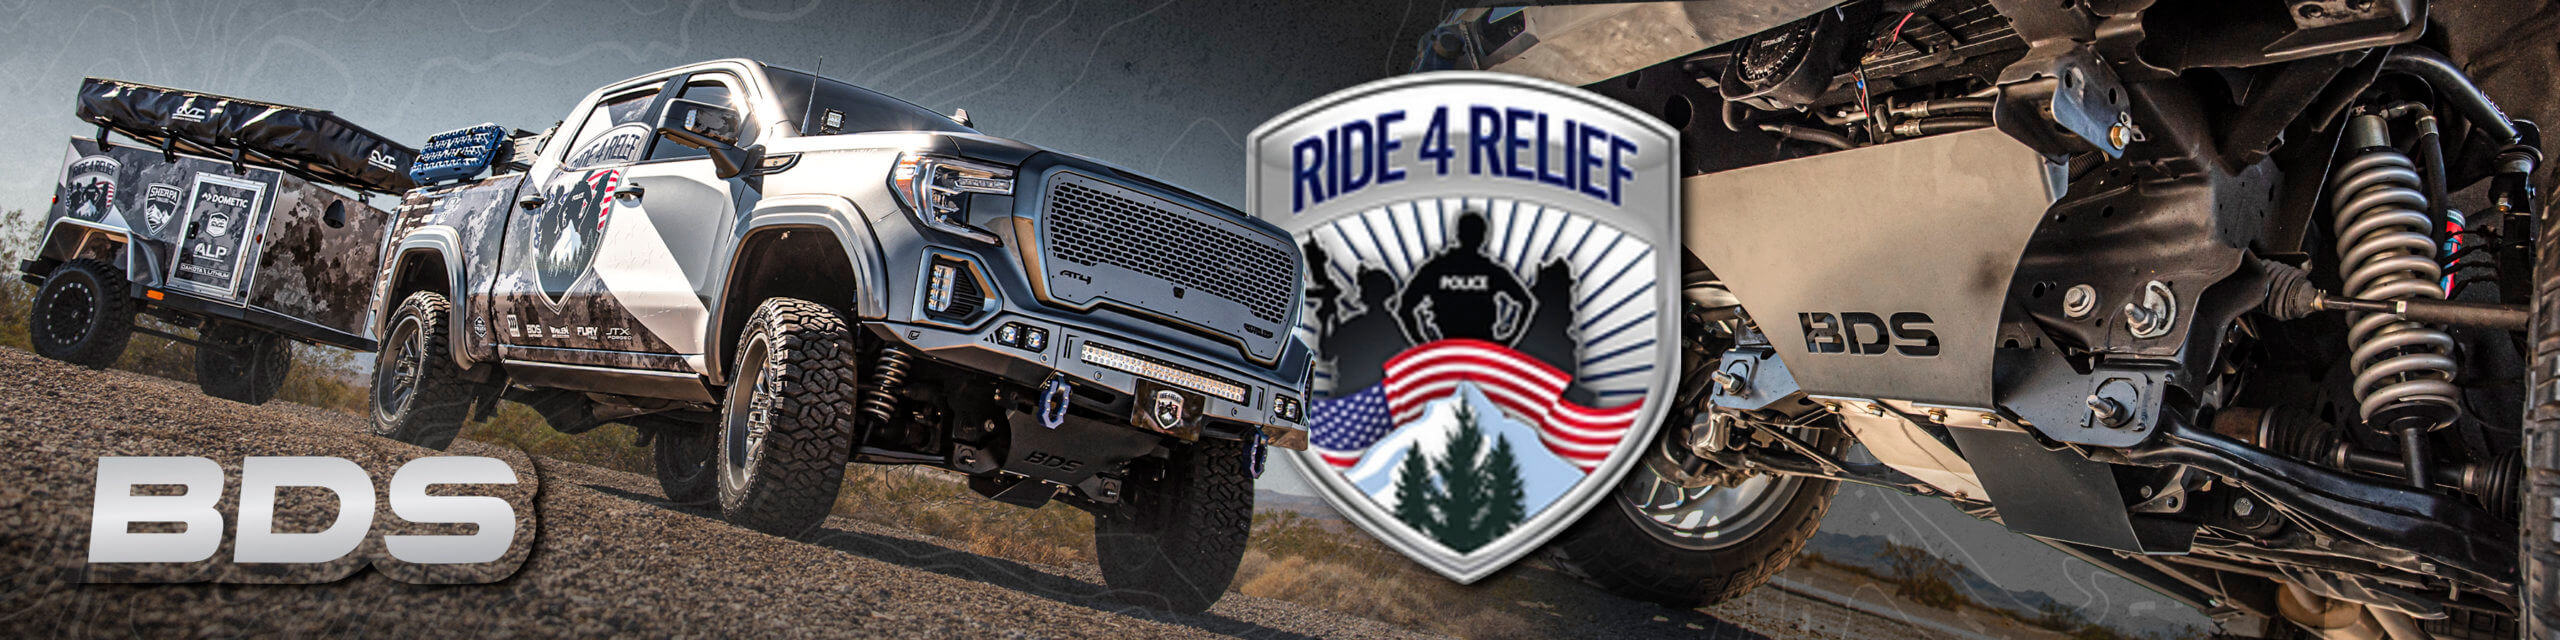 Ride4Relief banner